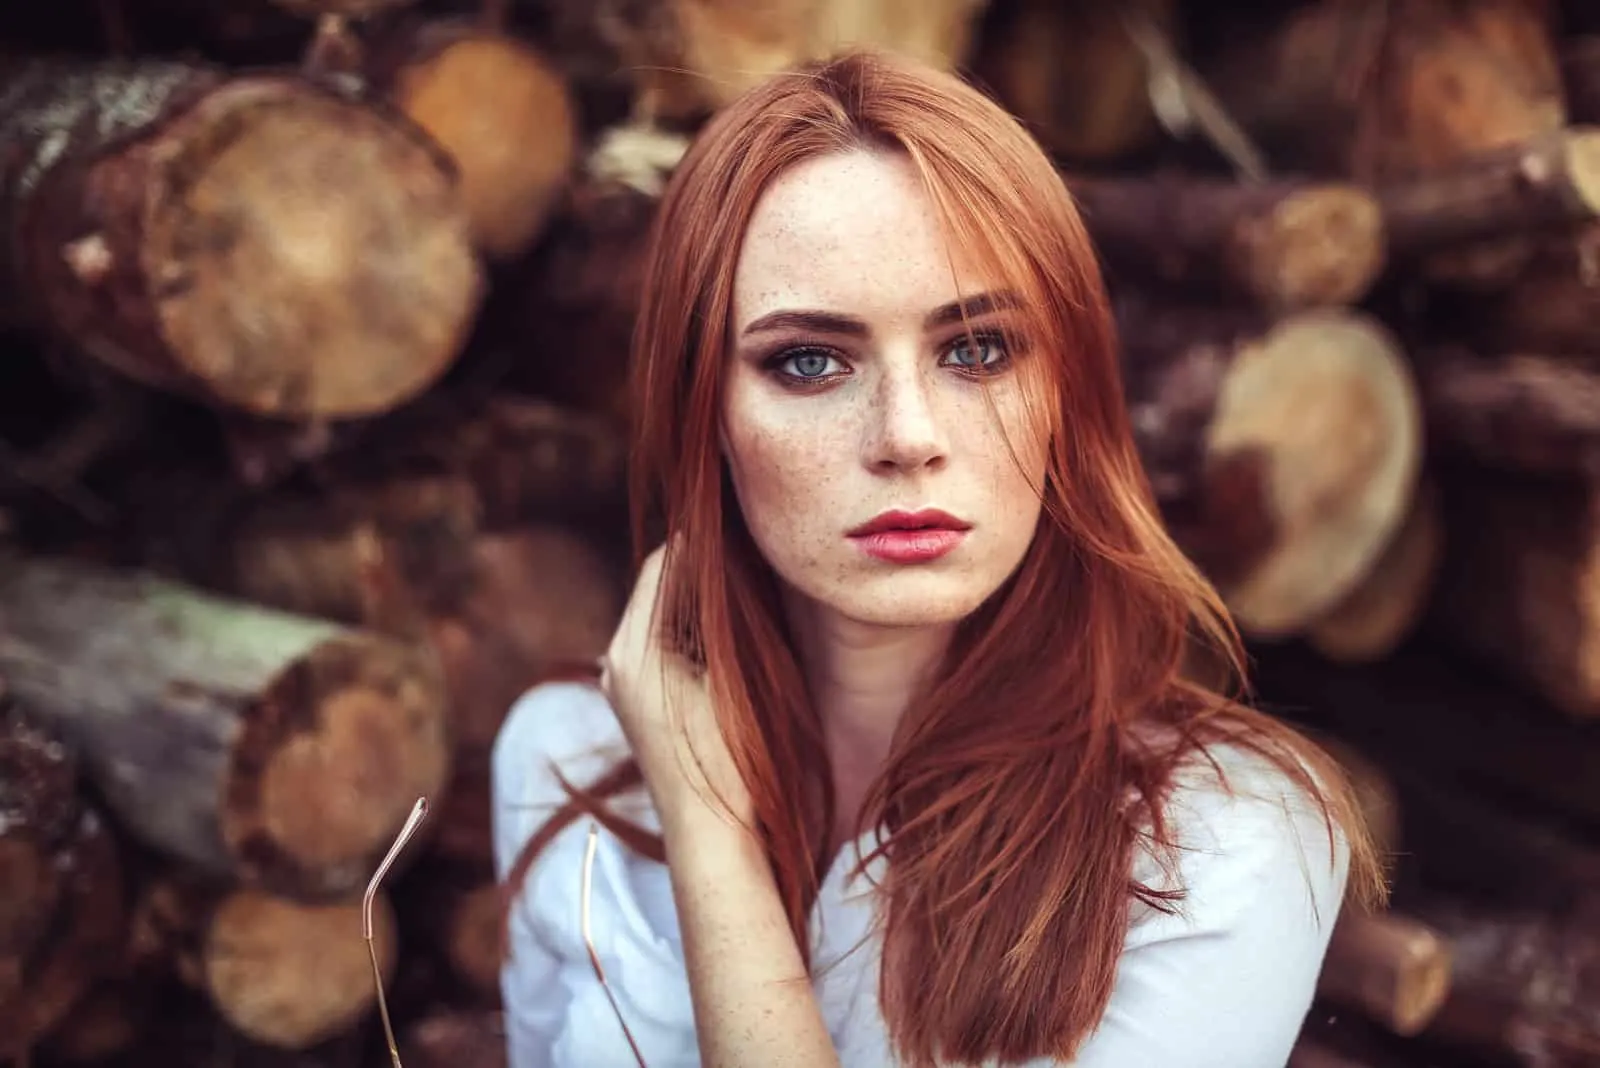 redhead young girl with healthy freckled skin wearing white top